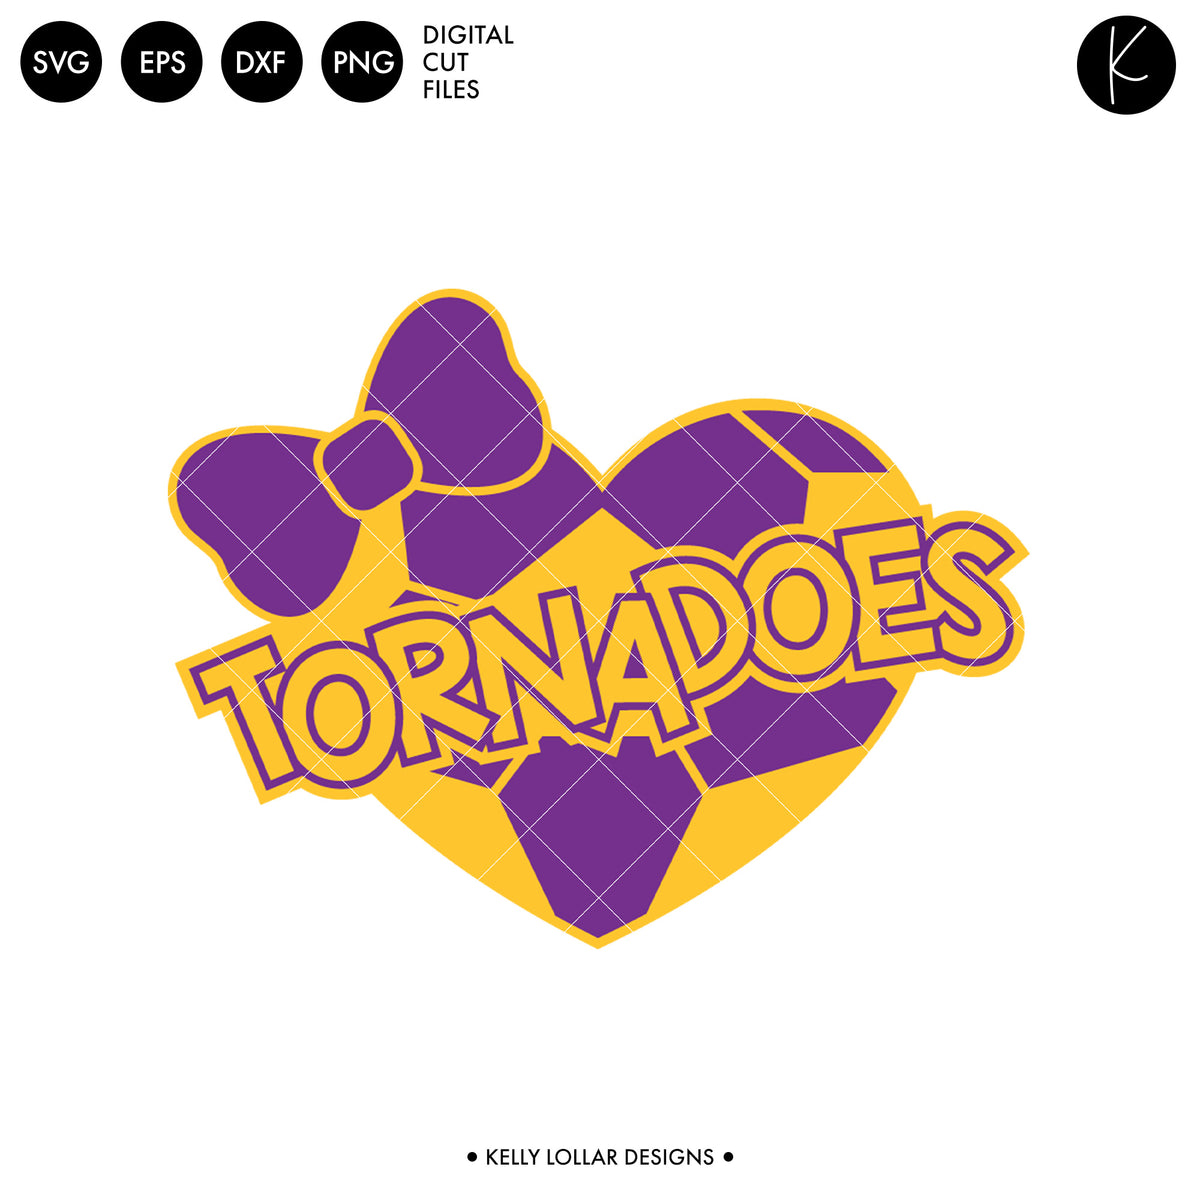 Tornadoes Soccer and Football Bundle | SVG DXF EPS PNG Cut Files